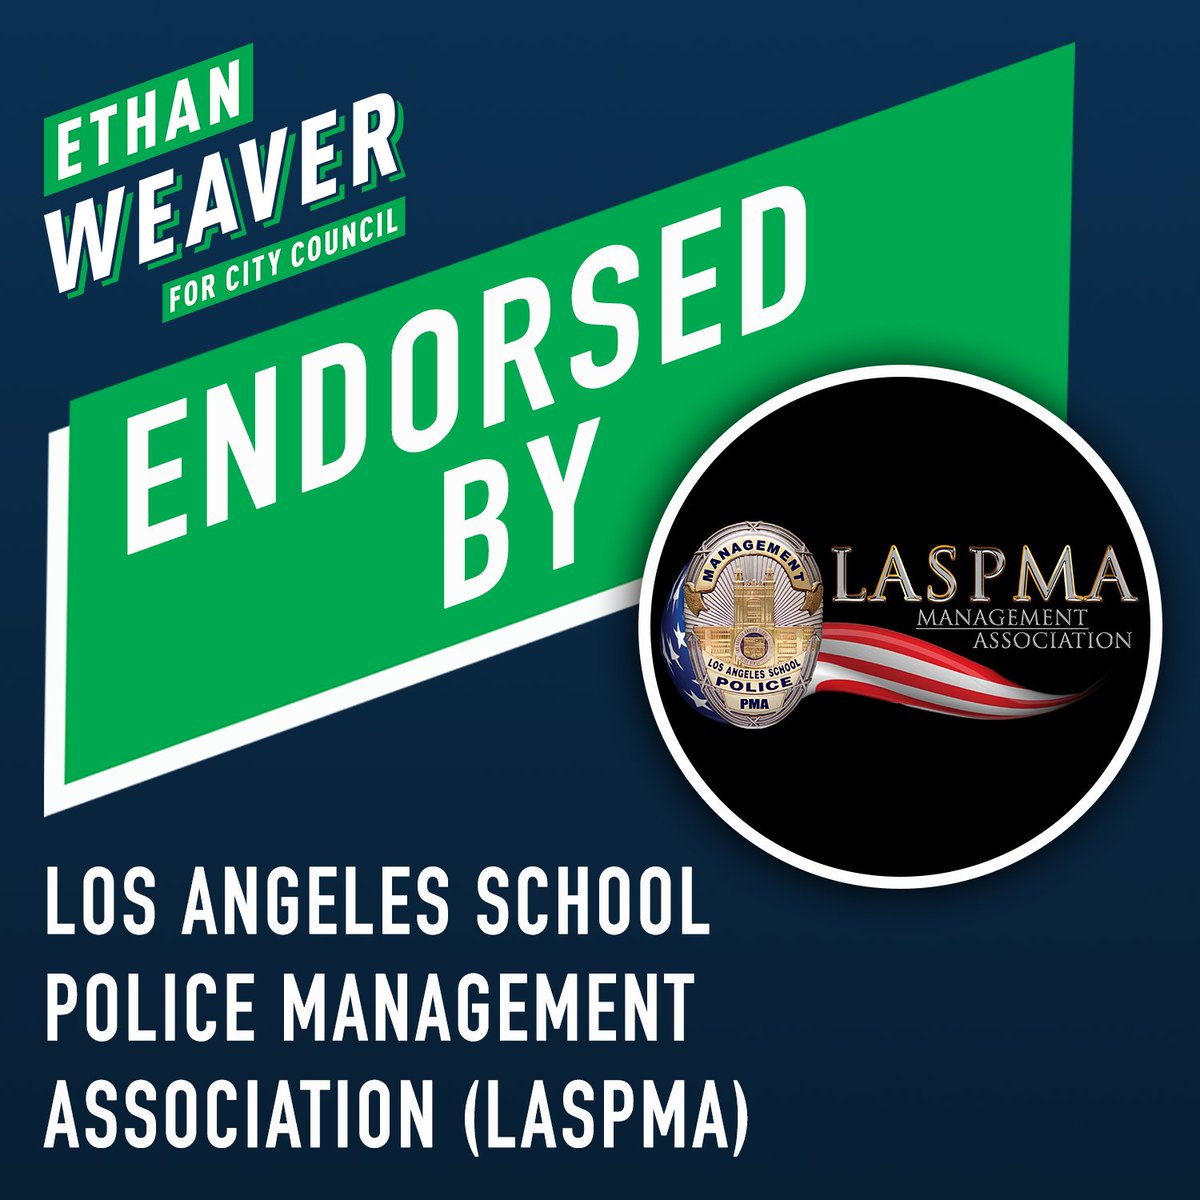 Schools should always serve as safe spaces, where students can learn and grow without fear. Members of the LA School Police Management Association work tirelessly to ensure that students and educators are safe and protected in our schools. It's an honor to have their support.